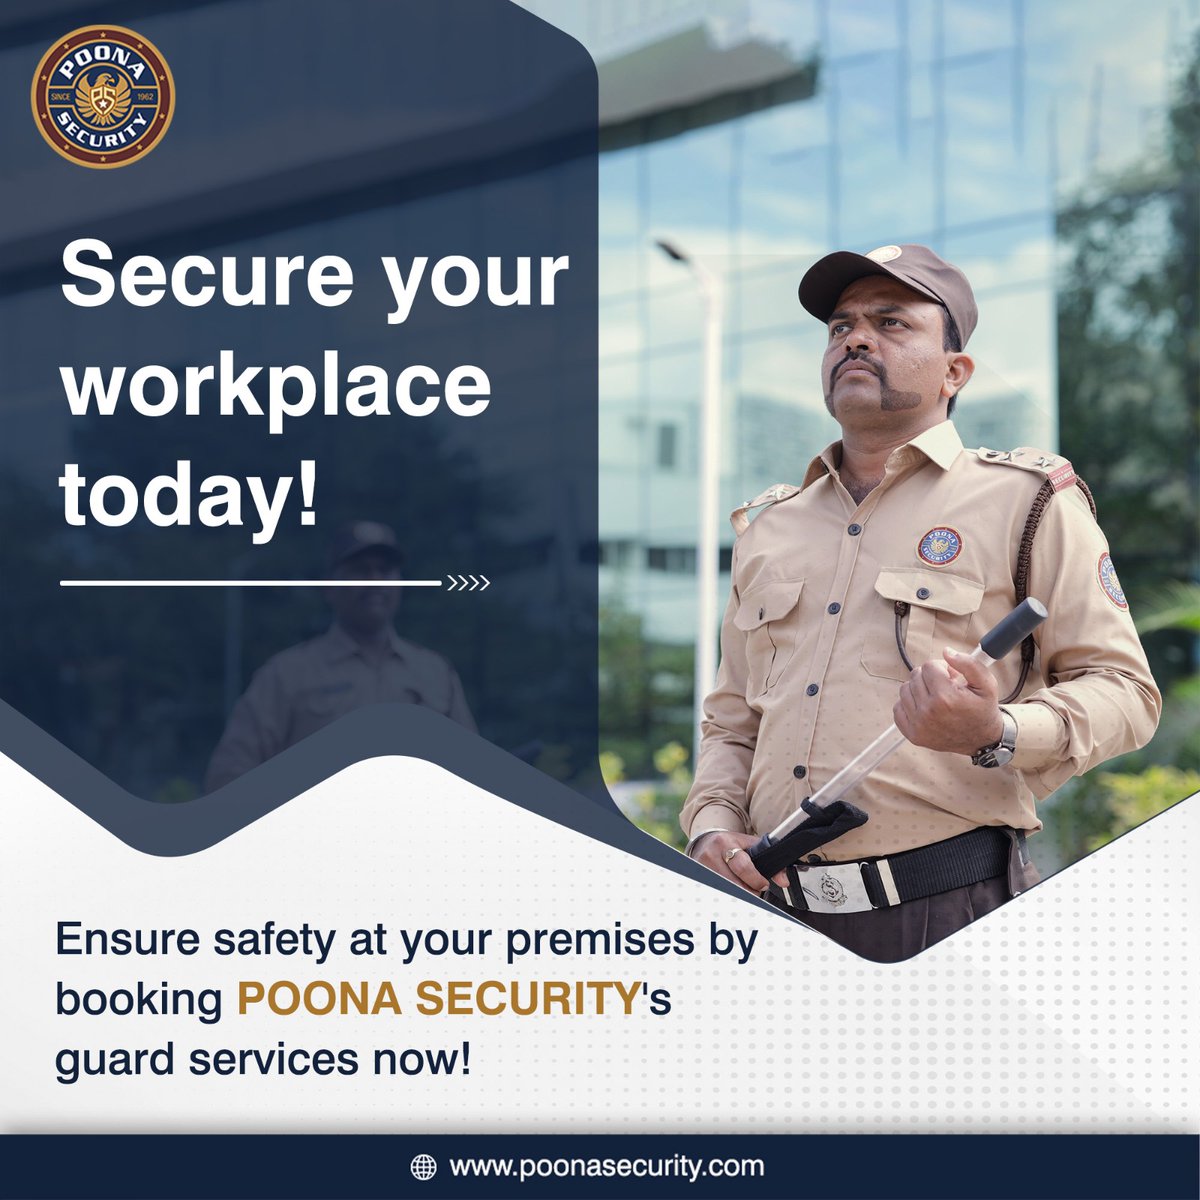 Safeguard Your Workspace: Experience Unparalleled Security with Poona Security! Secure your premises and enjoy enhanced peace of mind by booking our professional guard services today.

hashtag#PoonaSecurity hashtag#SecurityYouCanTrust hashtag#security hashtag#SecurityGuard